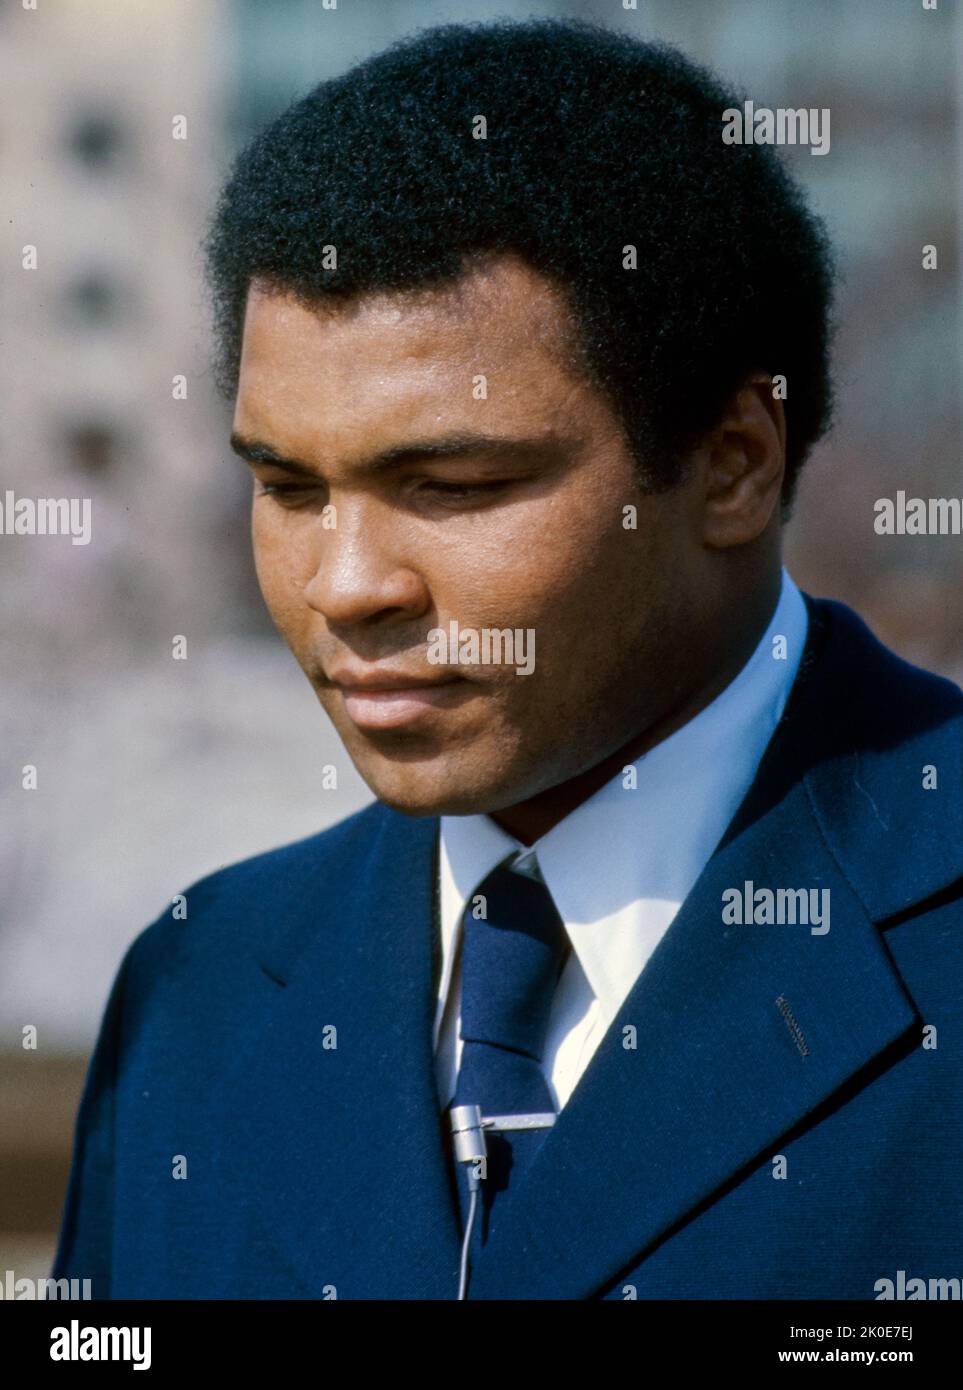 Muhammad Ali (Cassius Marcellus Clay), 1942 - 2016. American professional boxer, activist, entertainer, poet, and philanthropist. Nicknamed The Greatest, he is widely regarded as one of the most significant and celebrated figures of the 20th century. Stock Photo